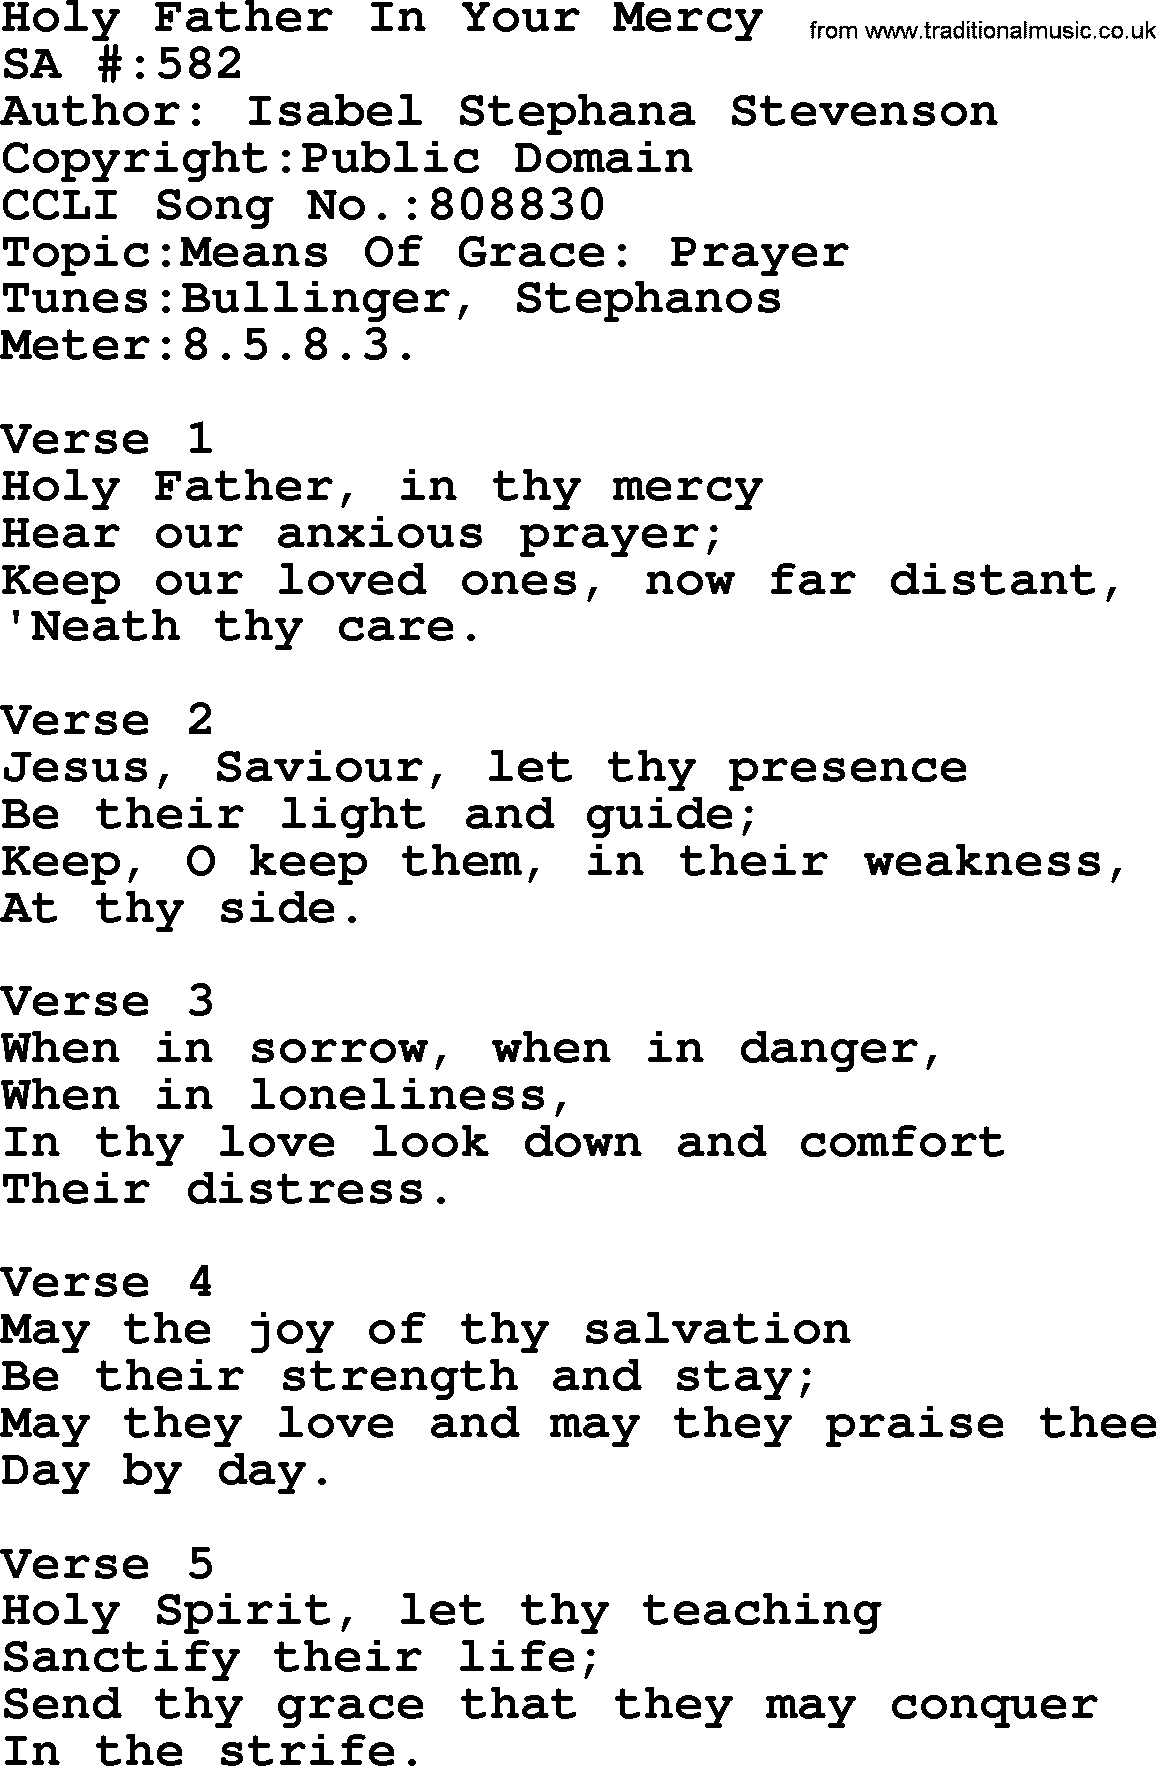 Salvation Army Hymnal, title: Holy Father In Your Mercy, with lyrics and PDF,